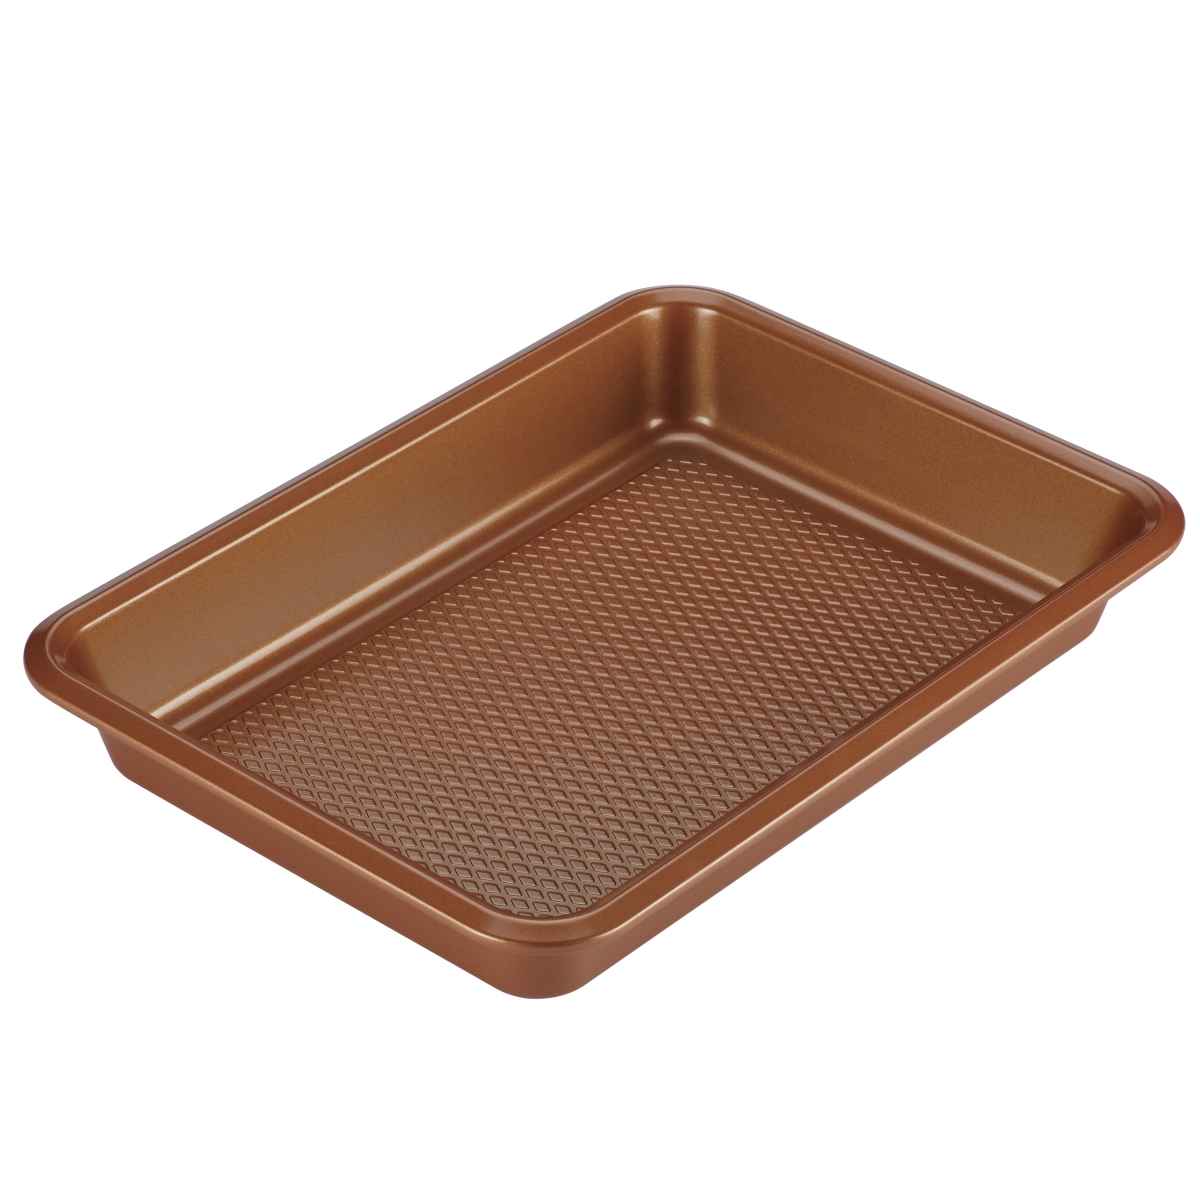 Picture of Ayesha Curry 47000 Cake Pan, 9 x 13 in. - Copper